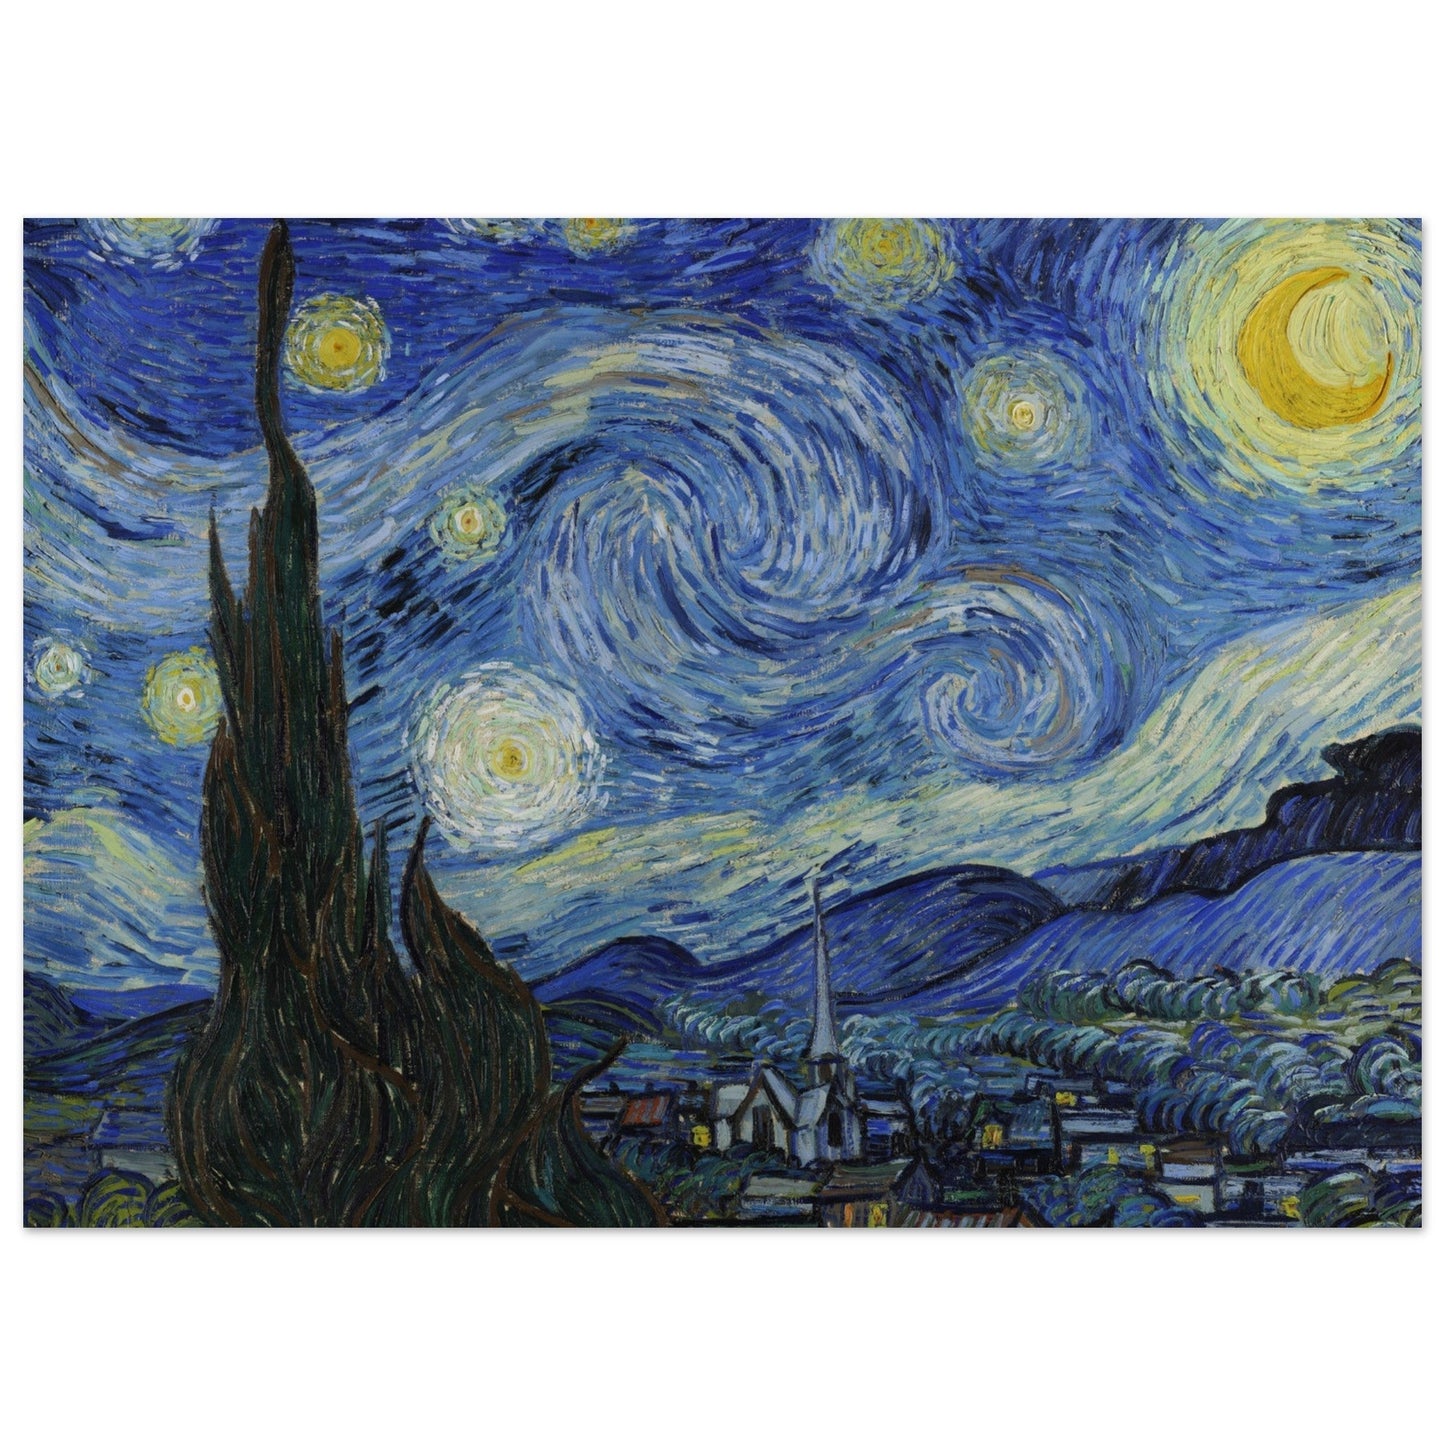 The Starry Night by Van Gogh is a stunning example of colored wall art. Its Pop Art hues and rich brushstrokes make it a perfect addition to any room. Whether you're looking for the Starry Night poster